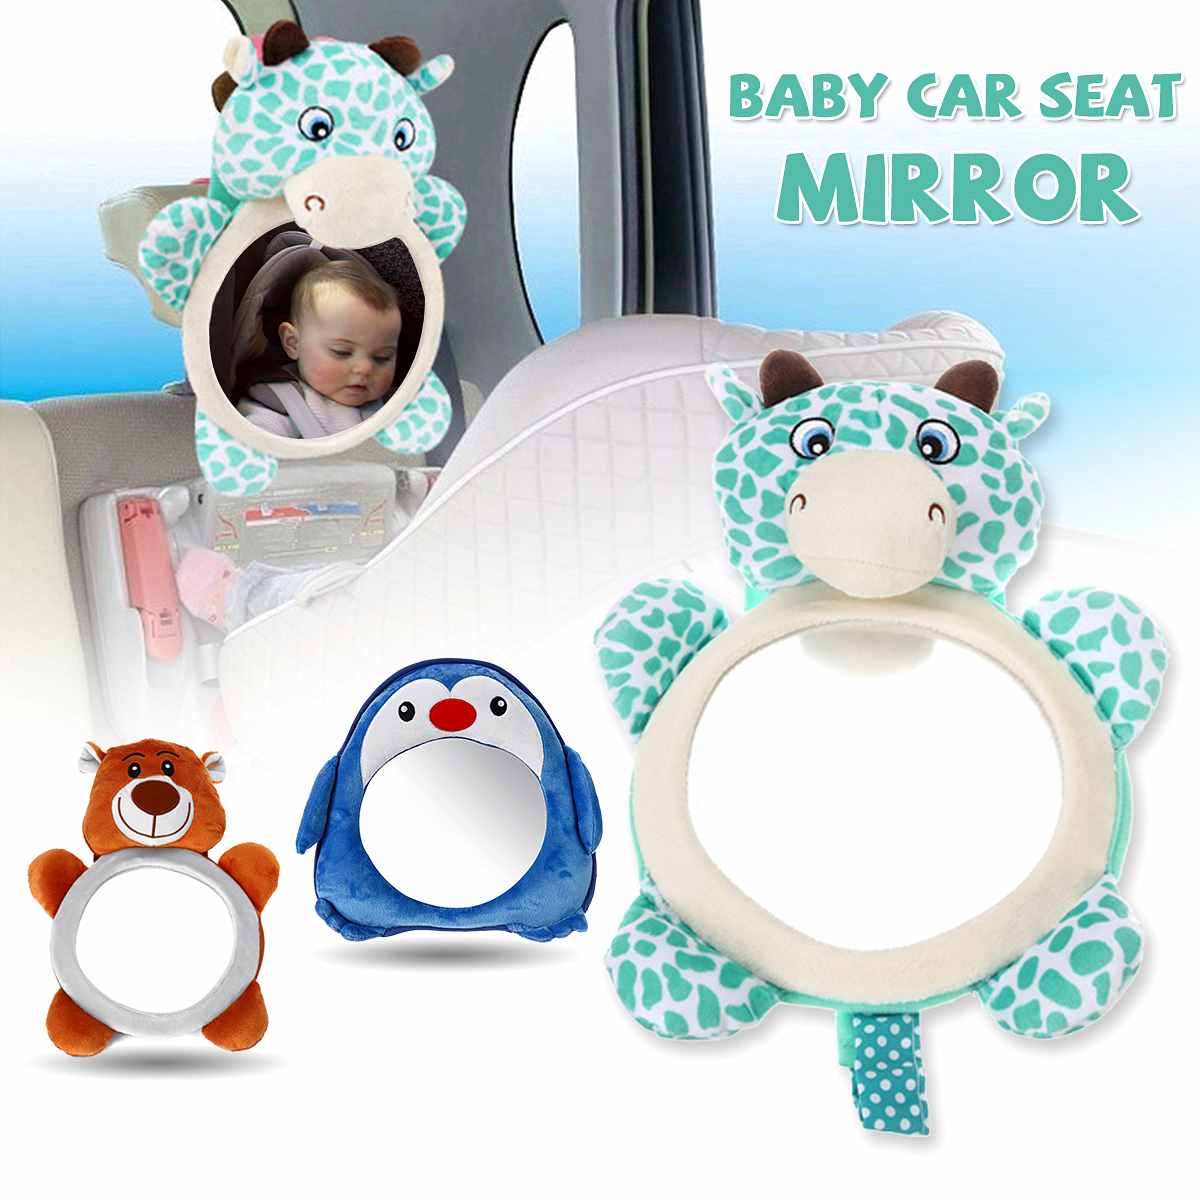 Car Baby Seat Inside Mirror View Safety Rear Ward Facing Kids Infant Care Safety Back Seat Mirror Kids Monitor Car Accessories